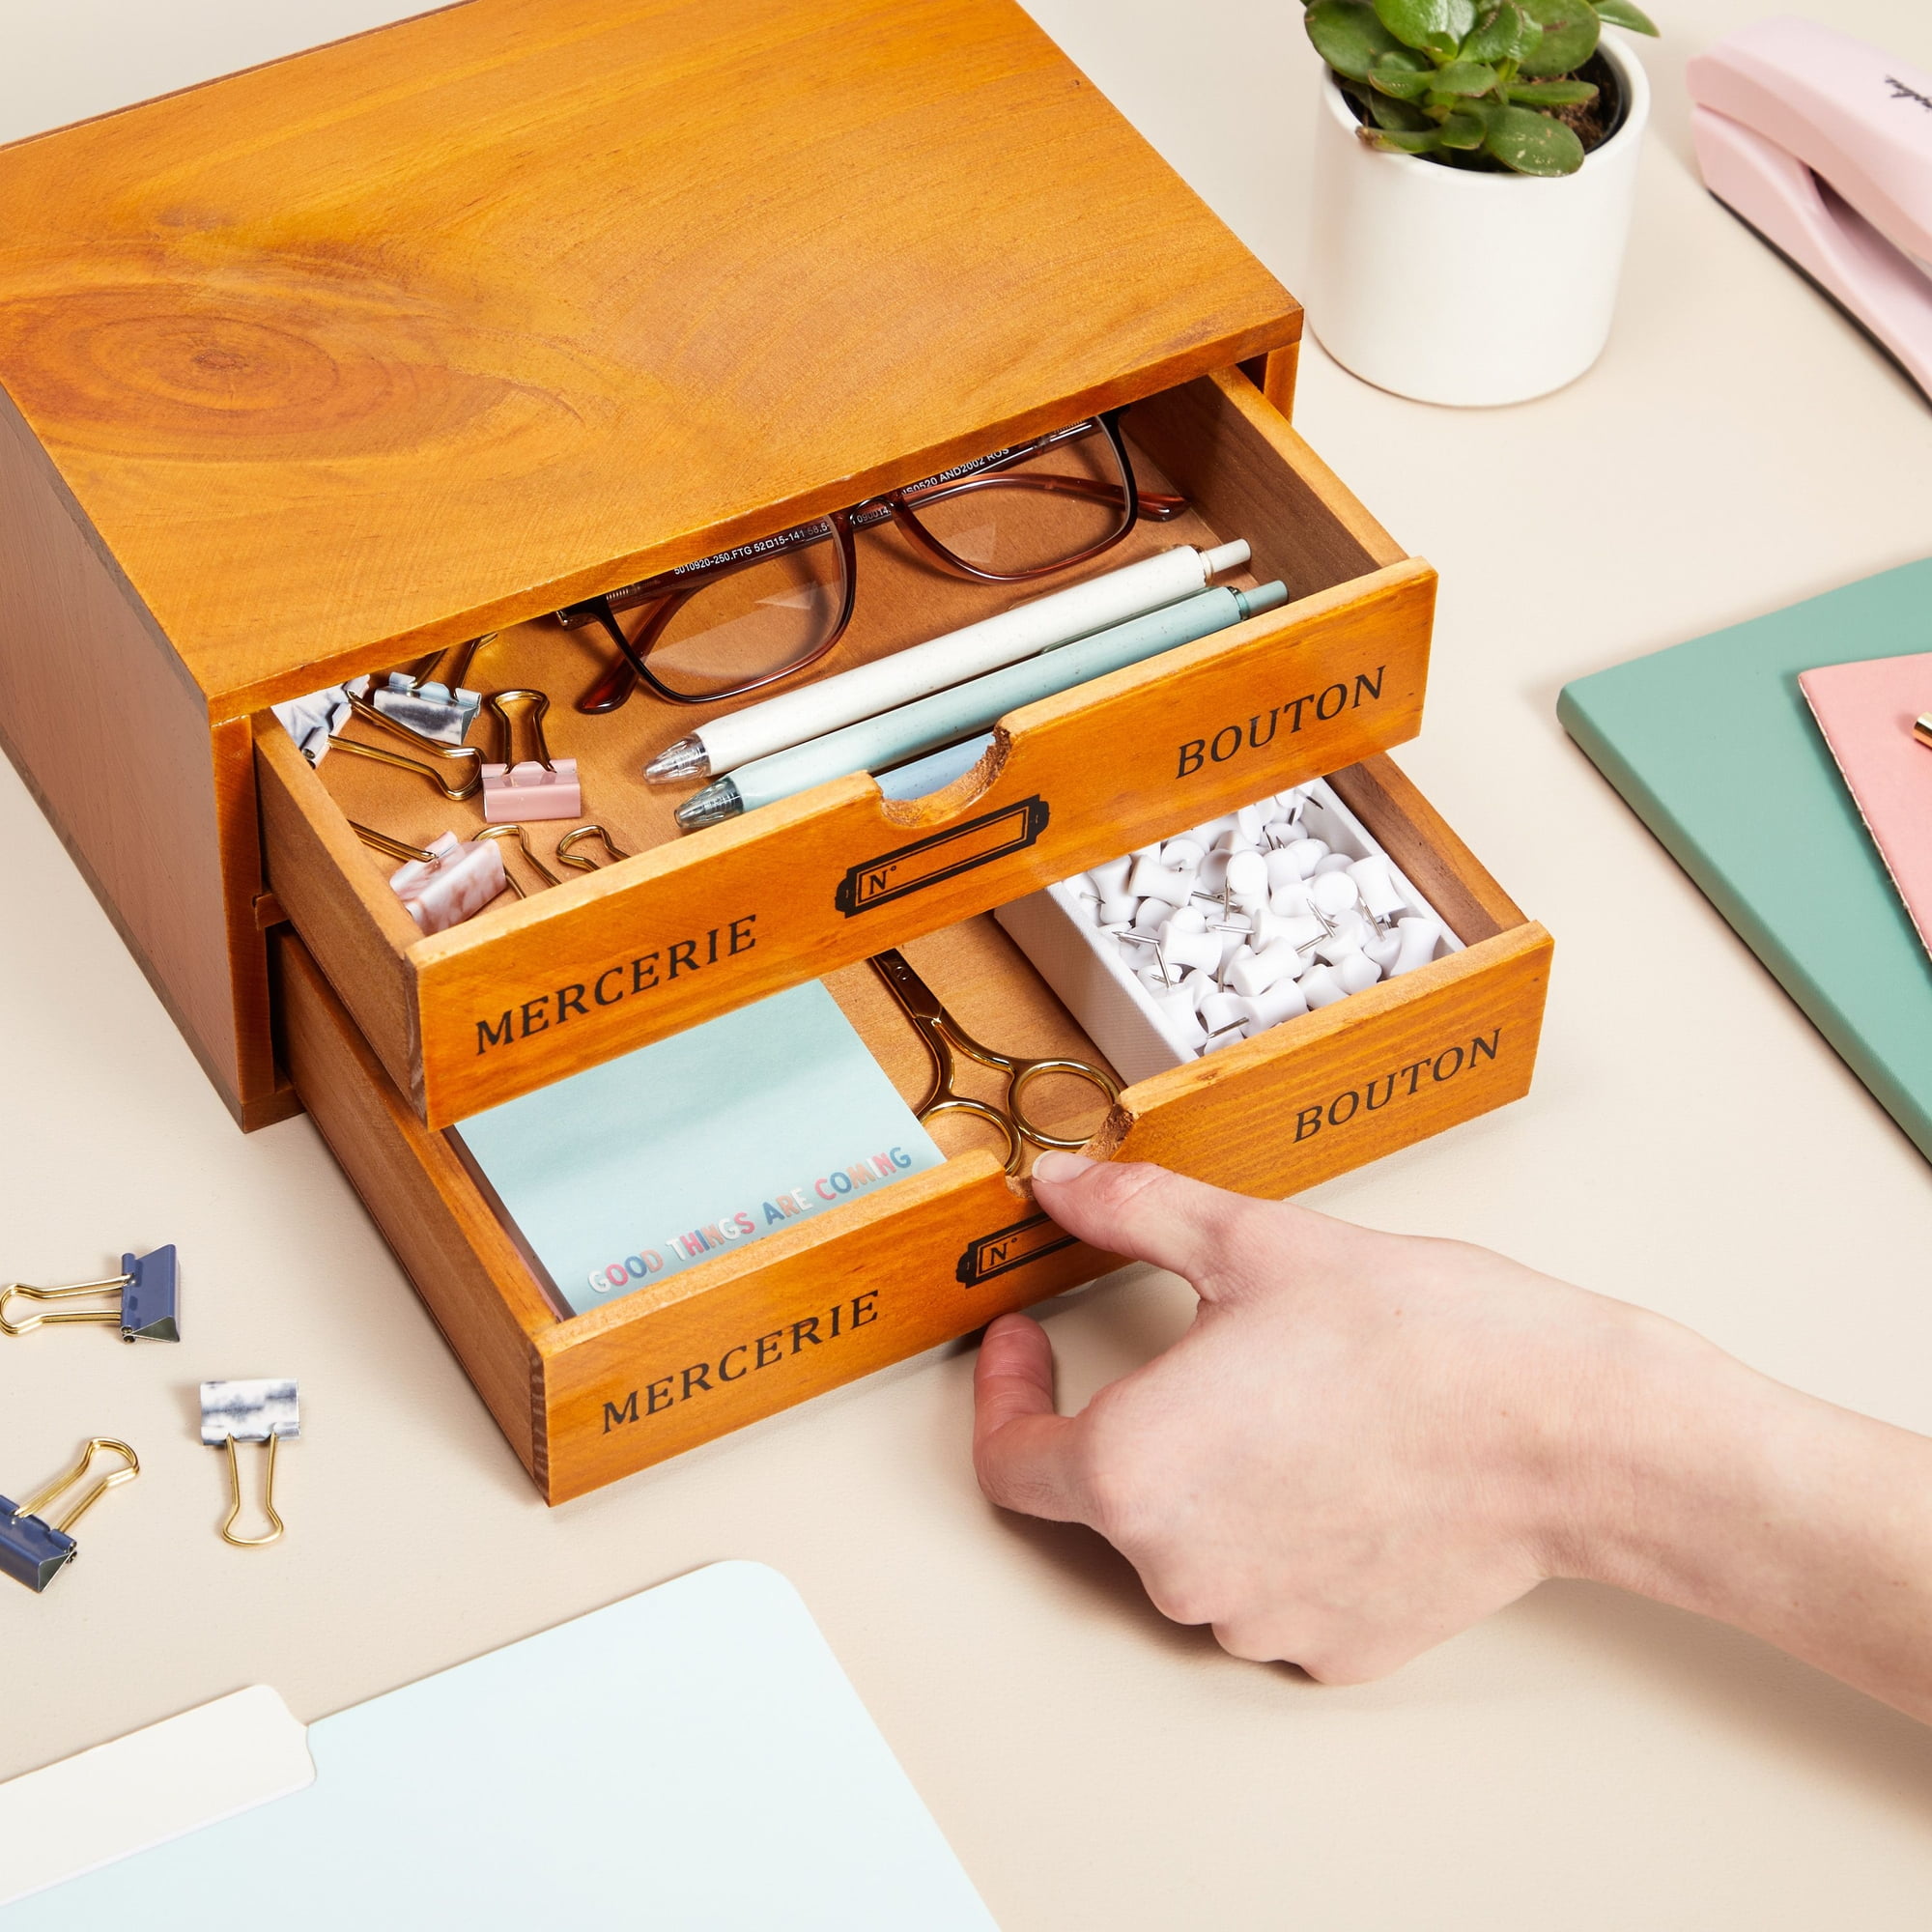  YRHH Small Wooden Desk Storage Box with Drawers